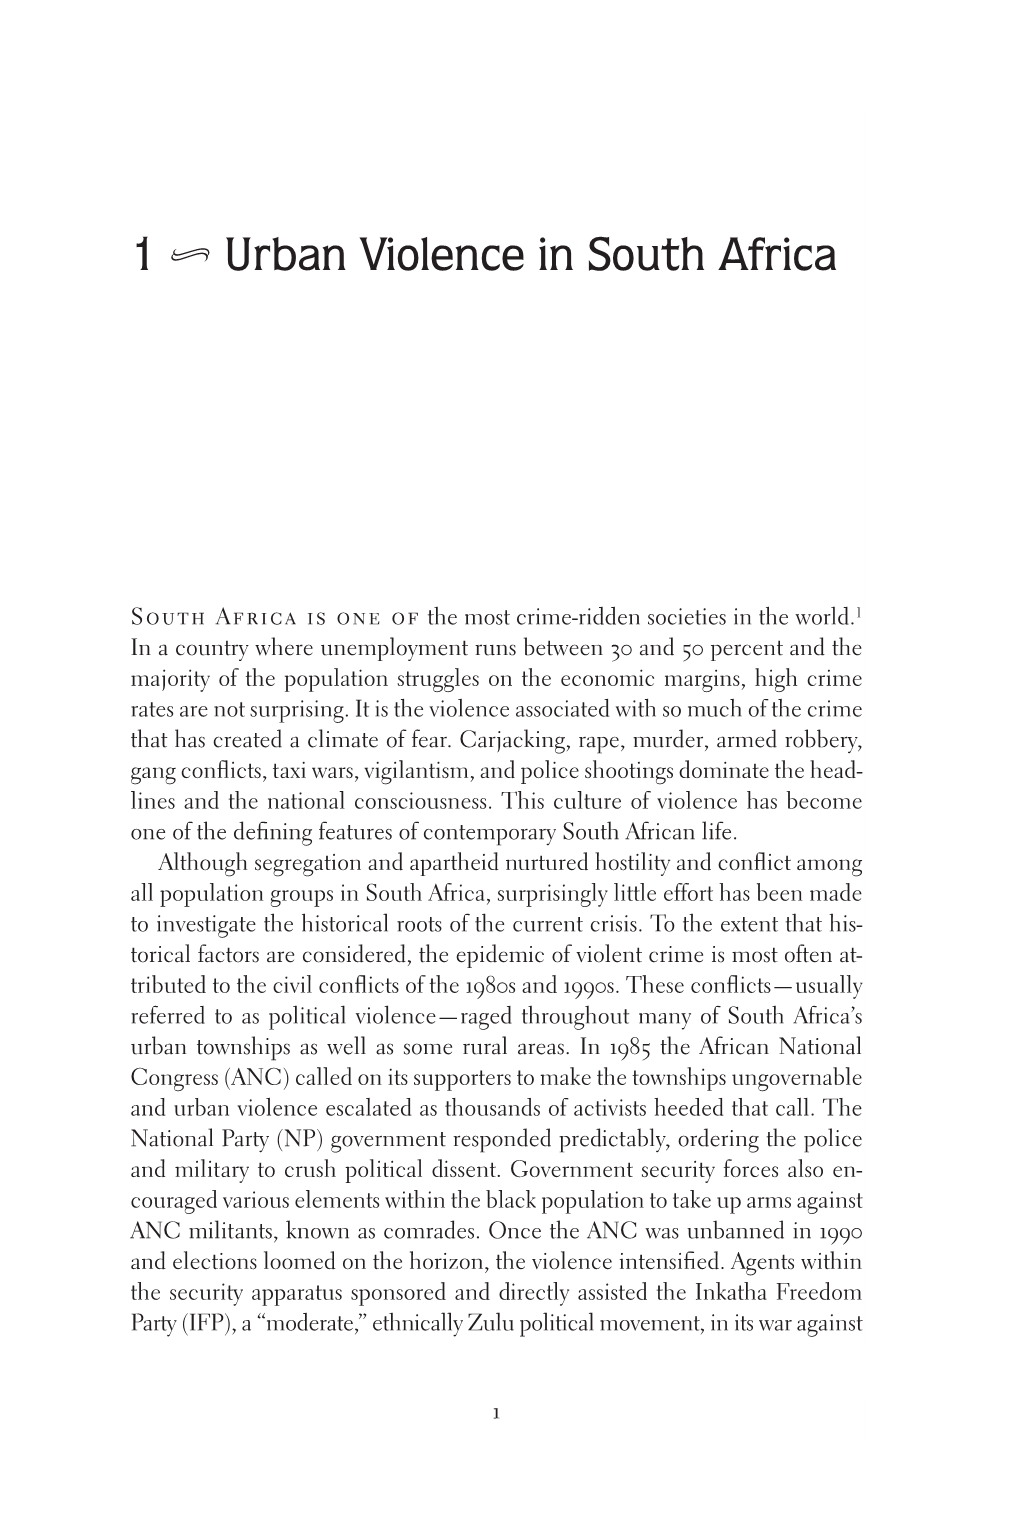 A History of the Marashea Gangs in South Africa, 1947-1999